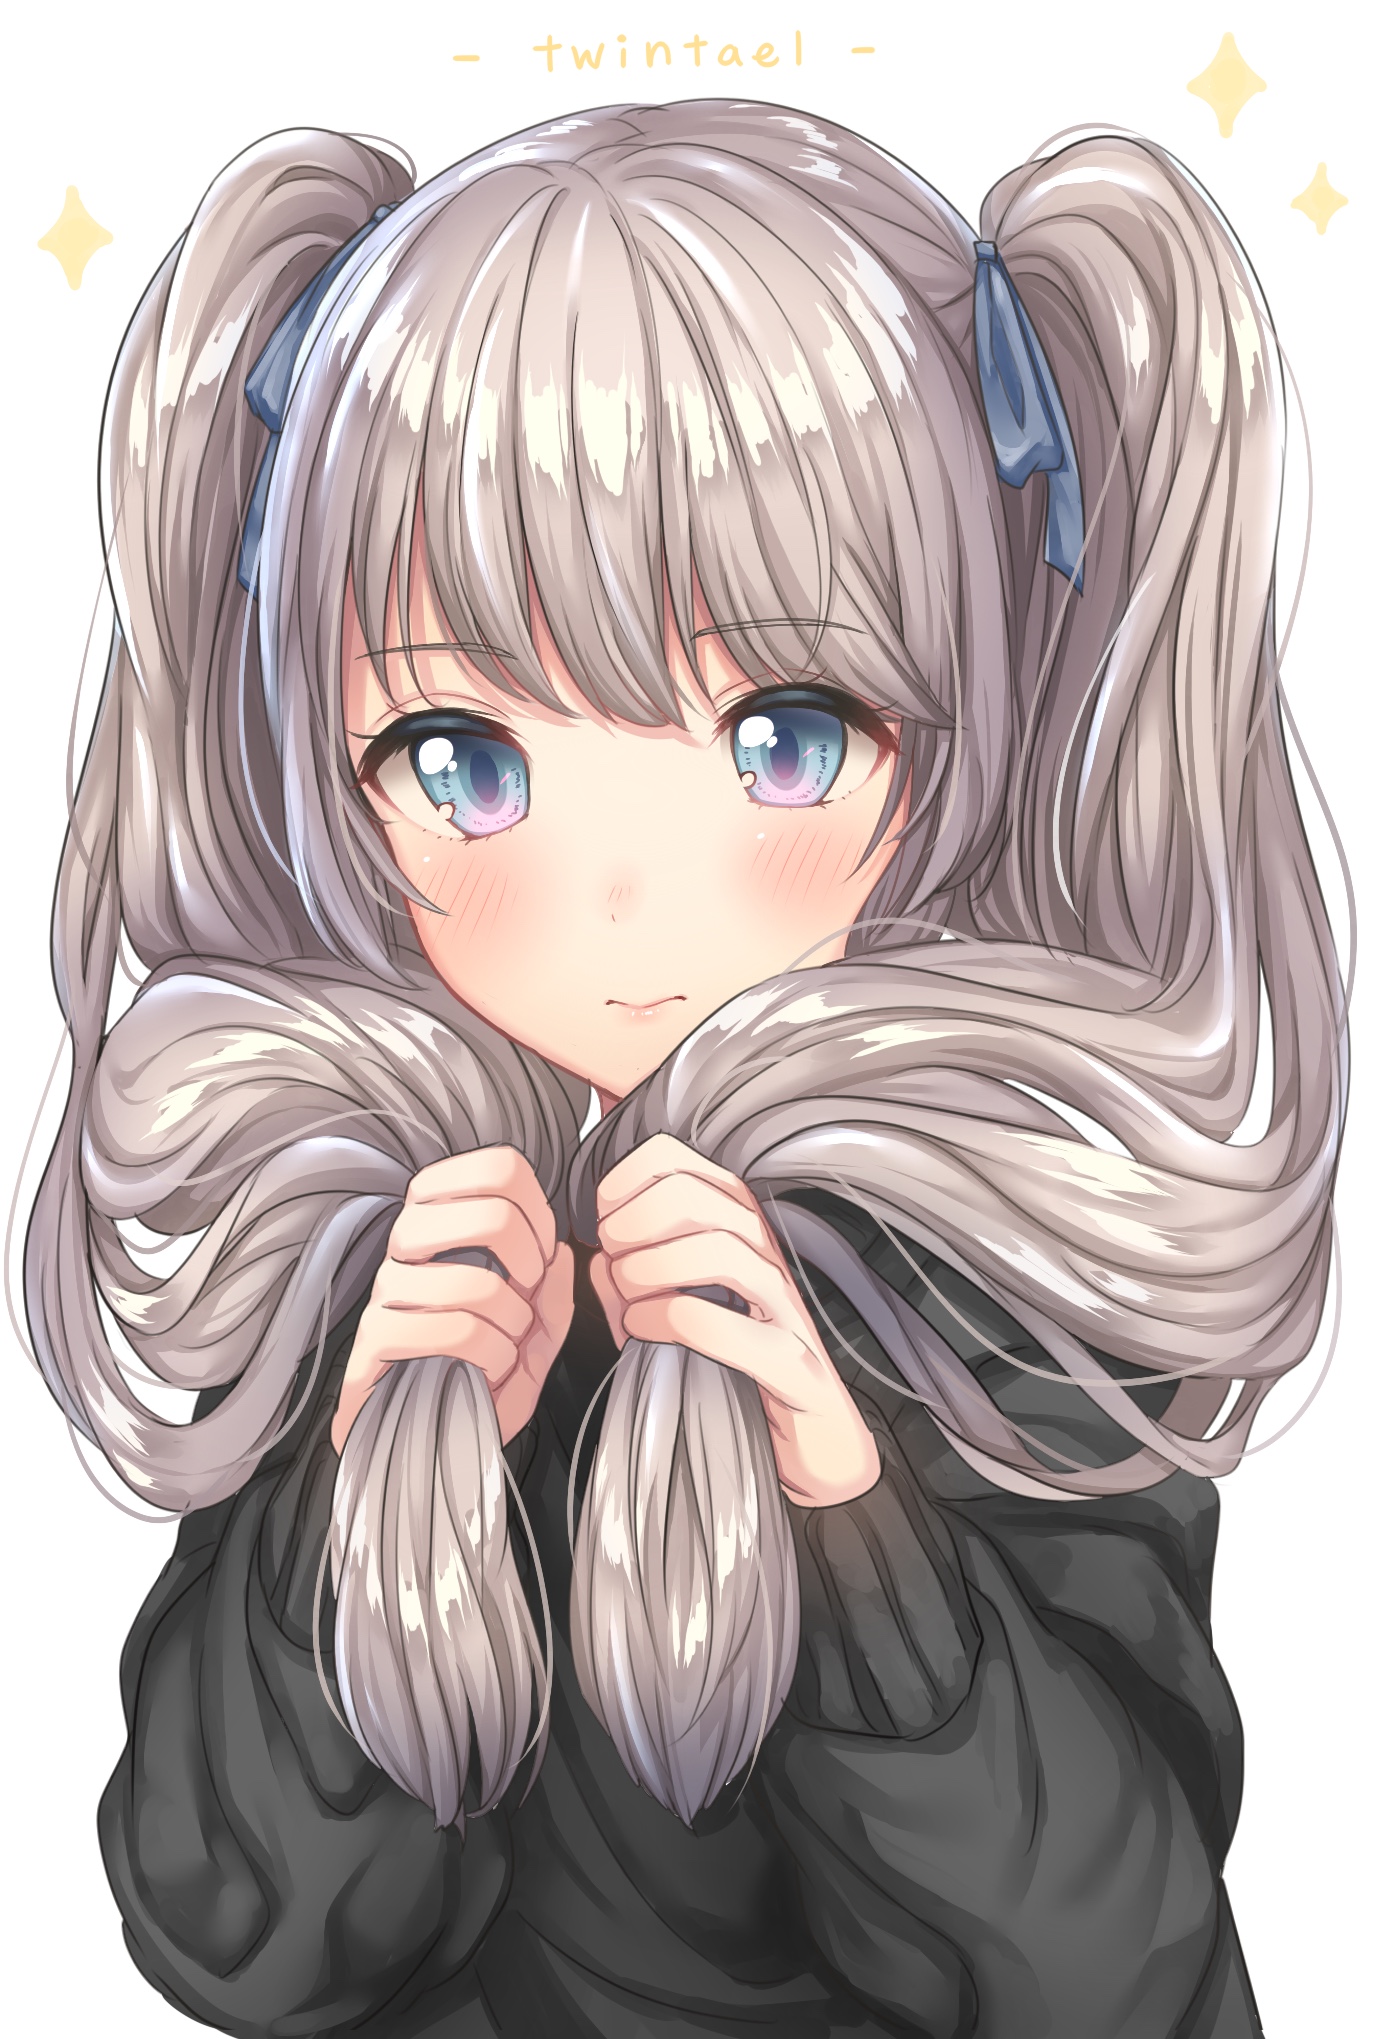 Anime Girl- Twintail by angelxcross on DeviantArt